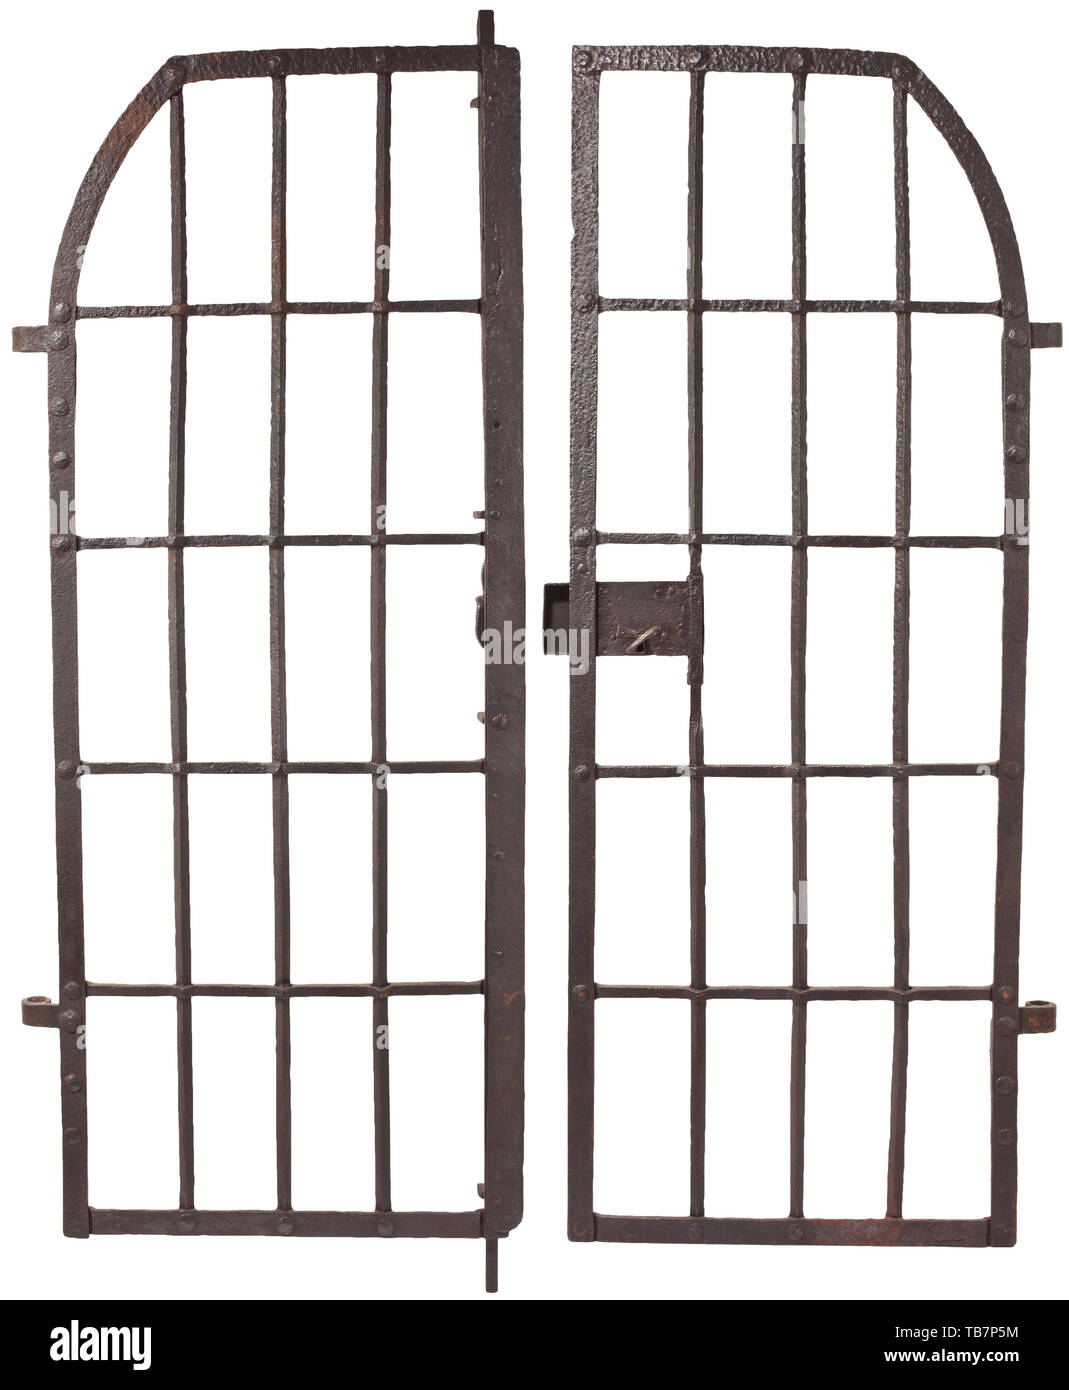 A German two-winged lattice gate, 18th century, Wrought iron. Heavy lattice, both wings slightly rounded at the top, with sturdy exterior hinges. On one side rectangular box lock with key, the opposite side with two upward and downward locking bolts. Slightly corroded, cleaned. Width without hinges 134 cm, height circa 180 cm. historic, historical, Additional-Rights-Clearance-Info-Not-Available Stock Photo